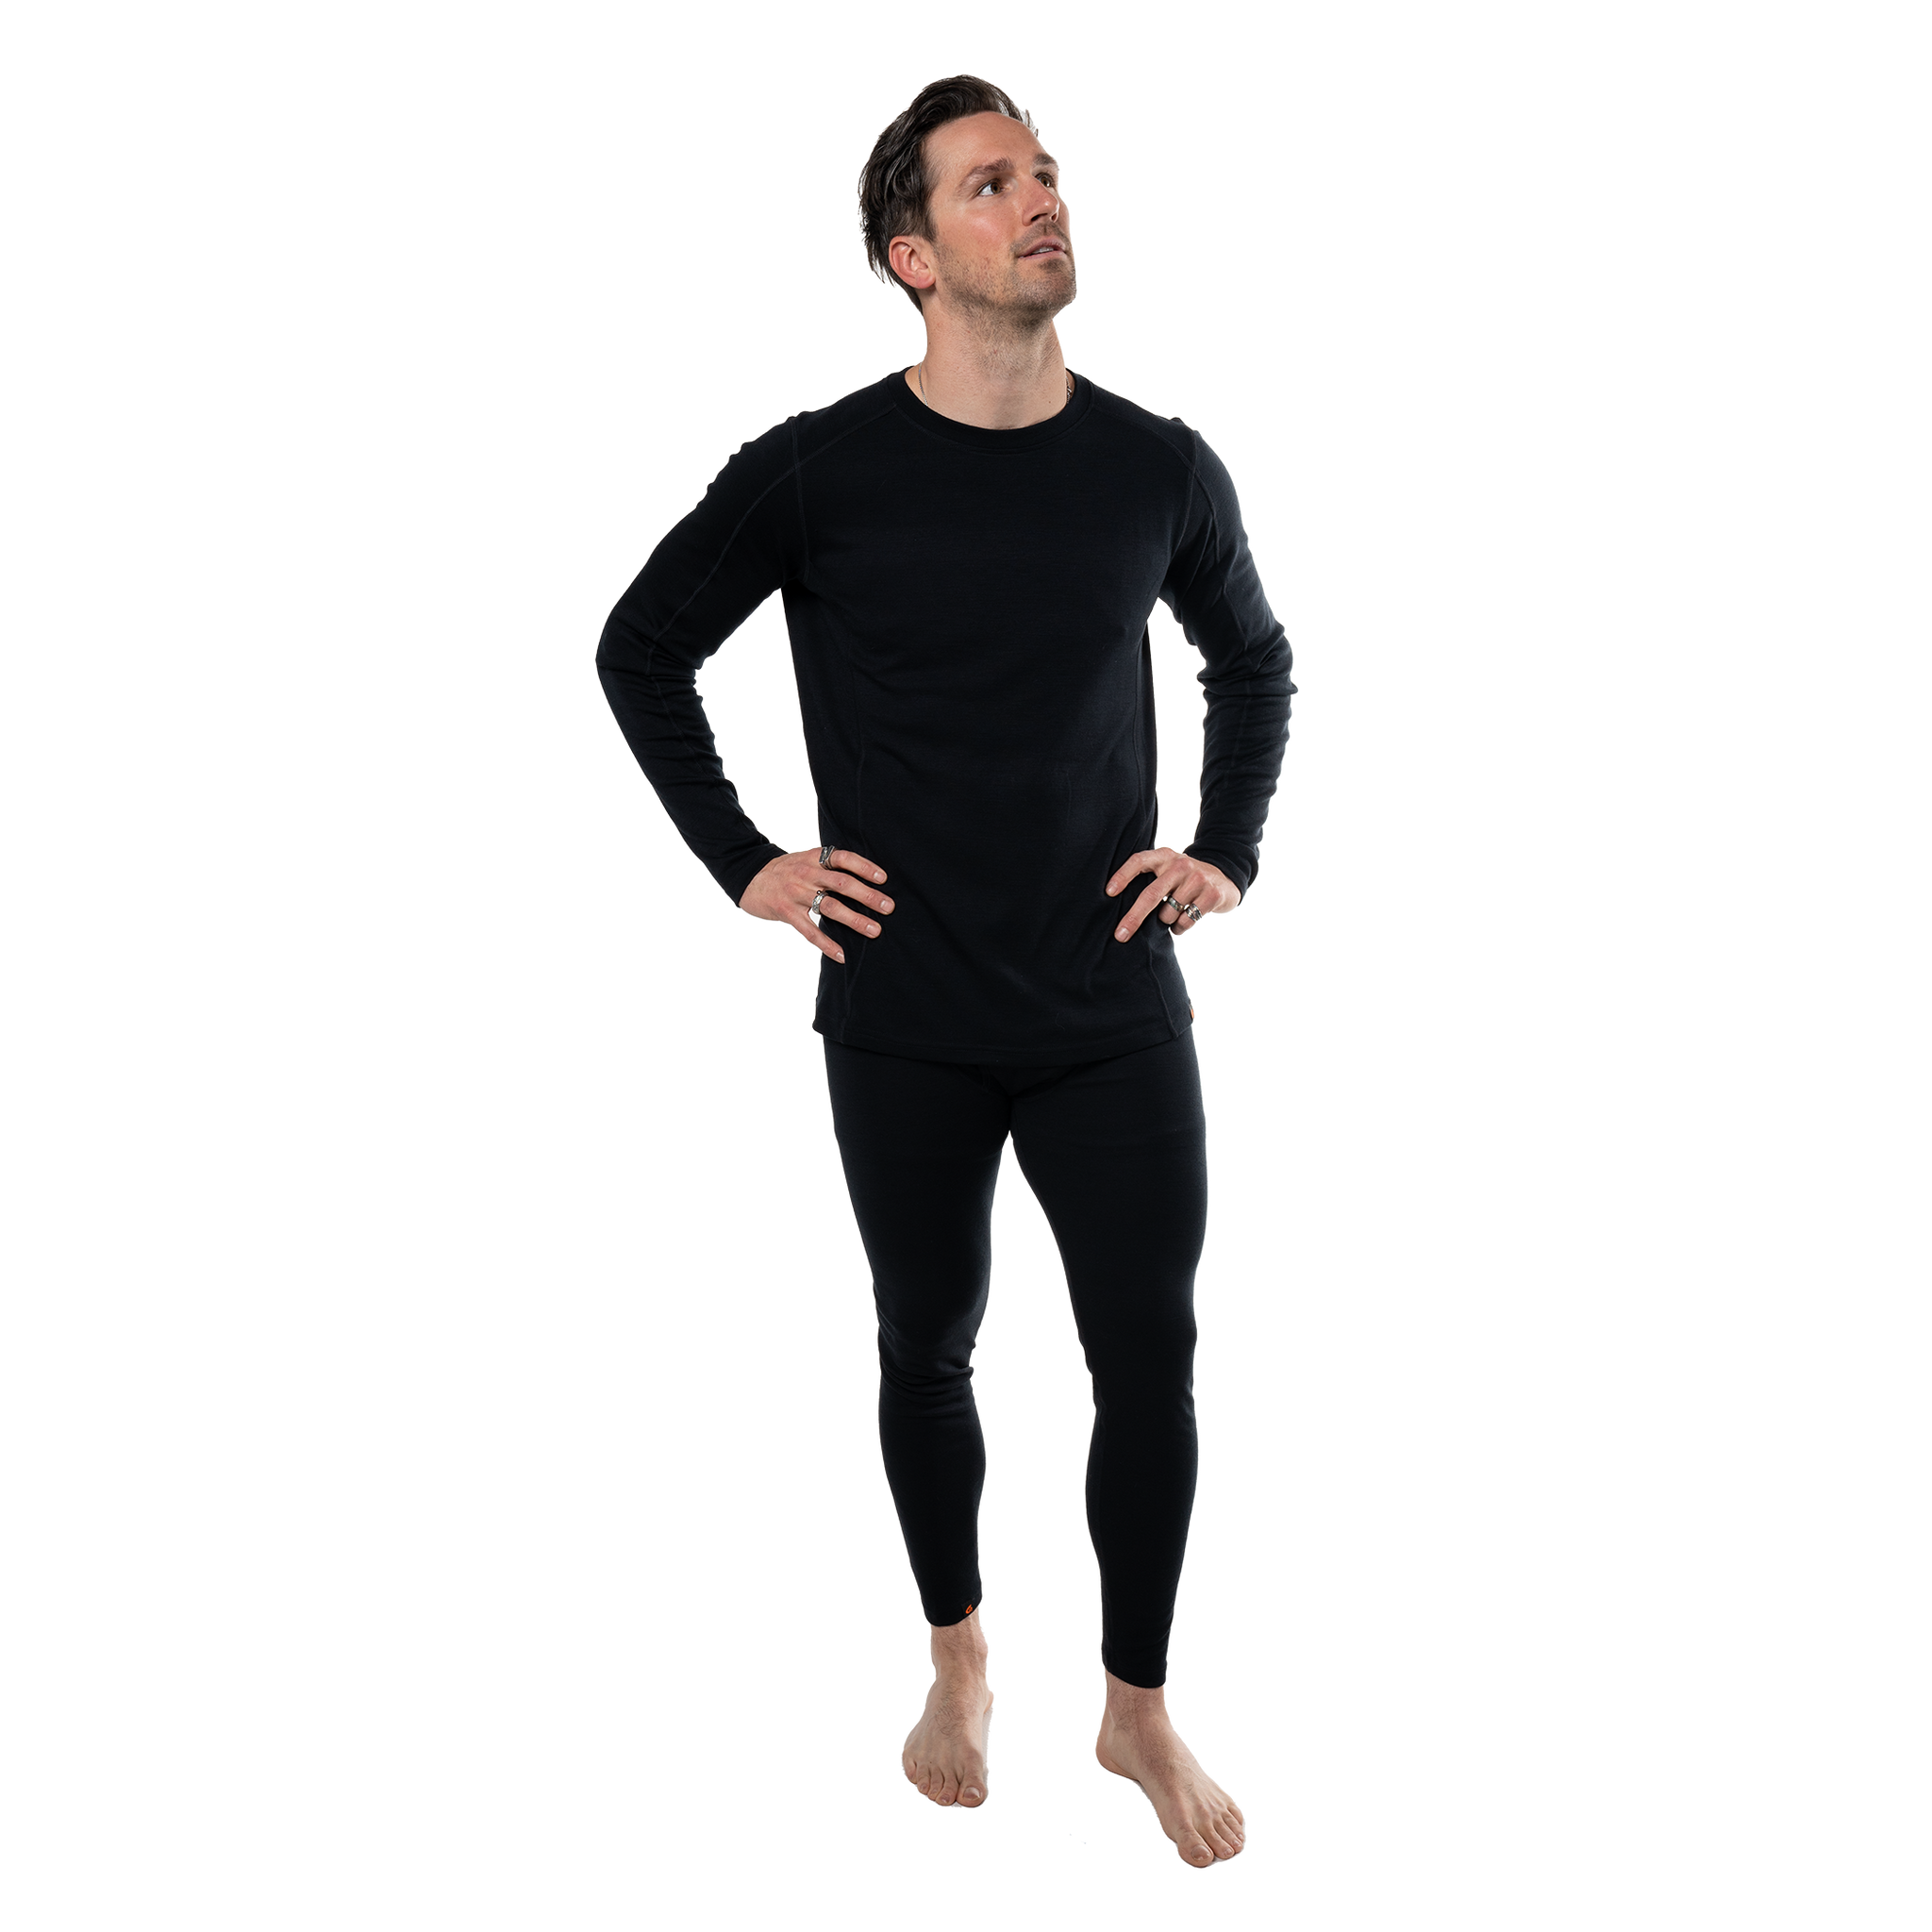 Men's Base Layer Long Sleeve Mid-Weight Crew Neck Top - Point6